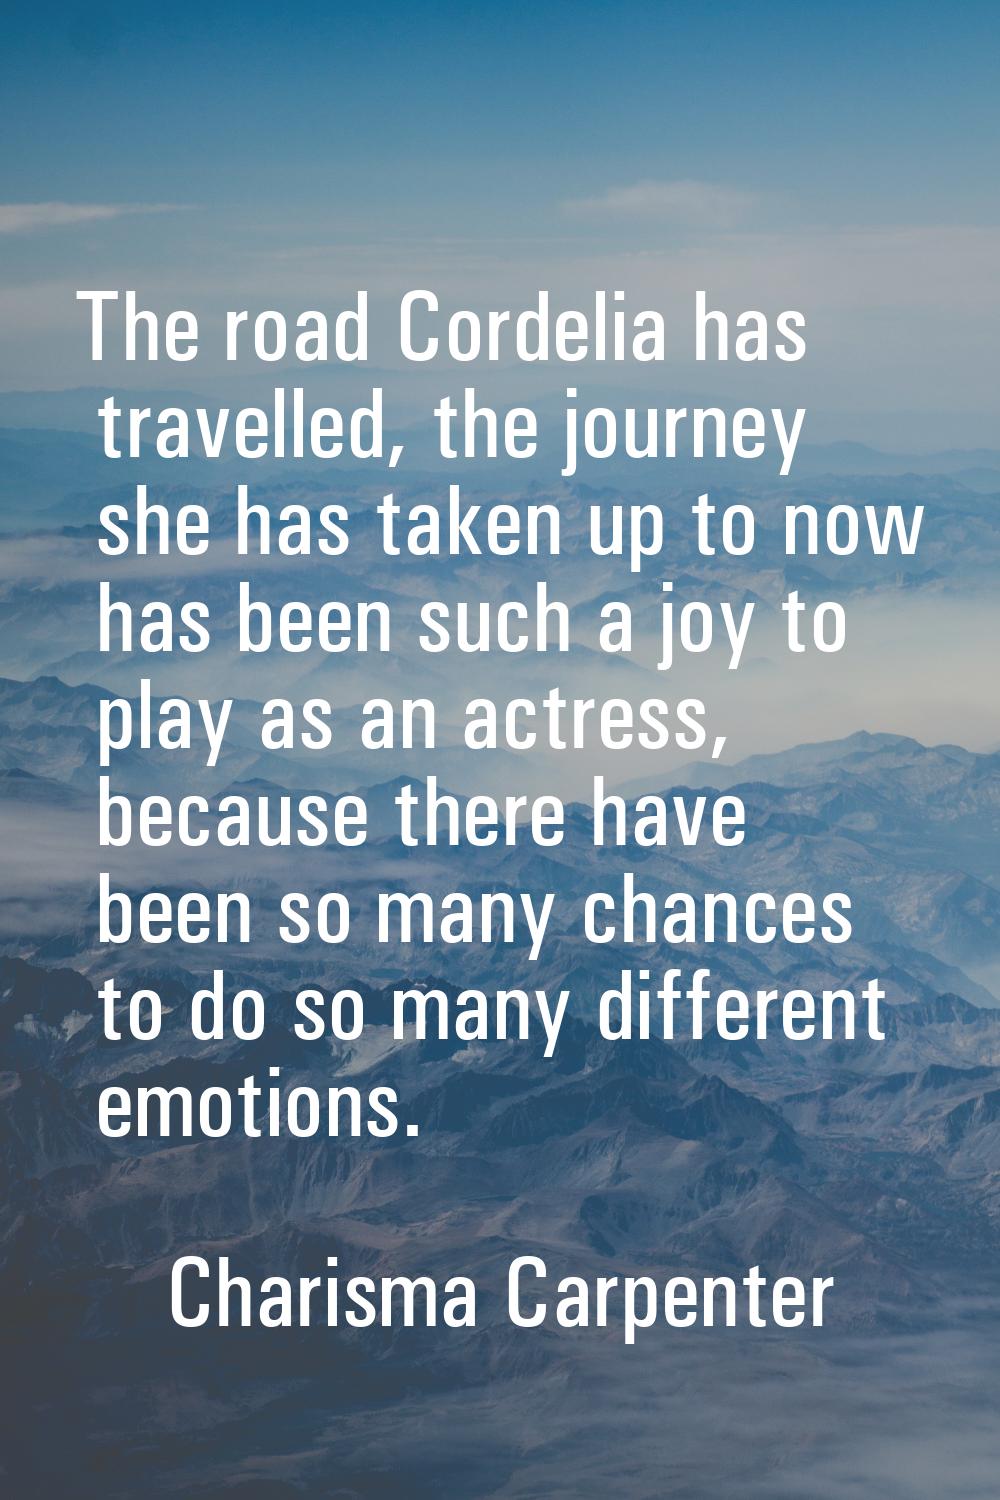 The road Cordelia has travelled, the journey she has taken up to now has been such a joy to play as